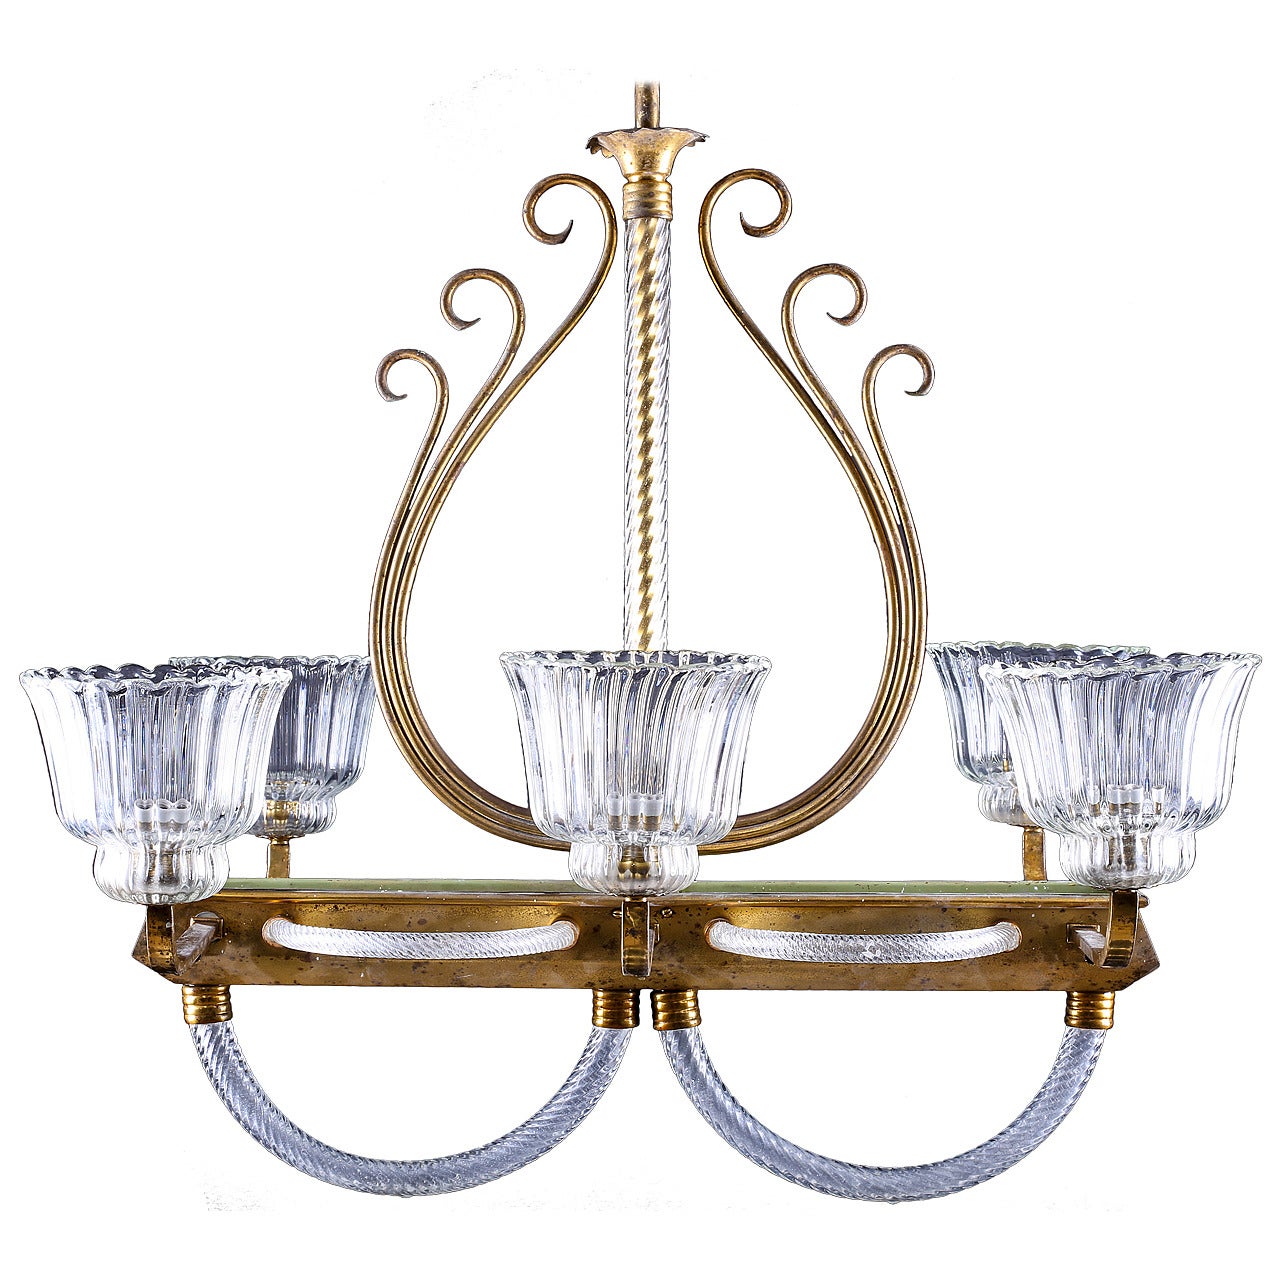 Venetian Brass and Clear Murano Glass Chandelier, Barovier and Toso Style, 1930s For Sale